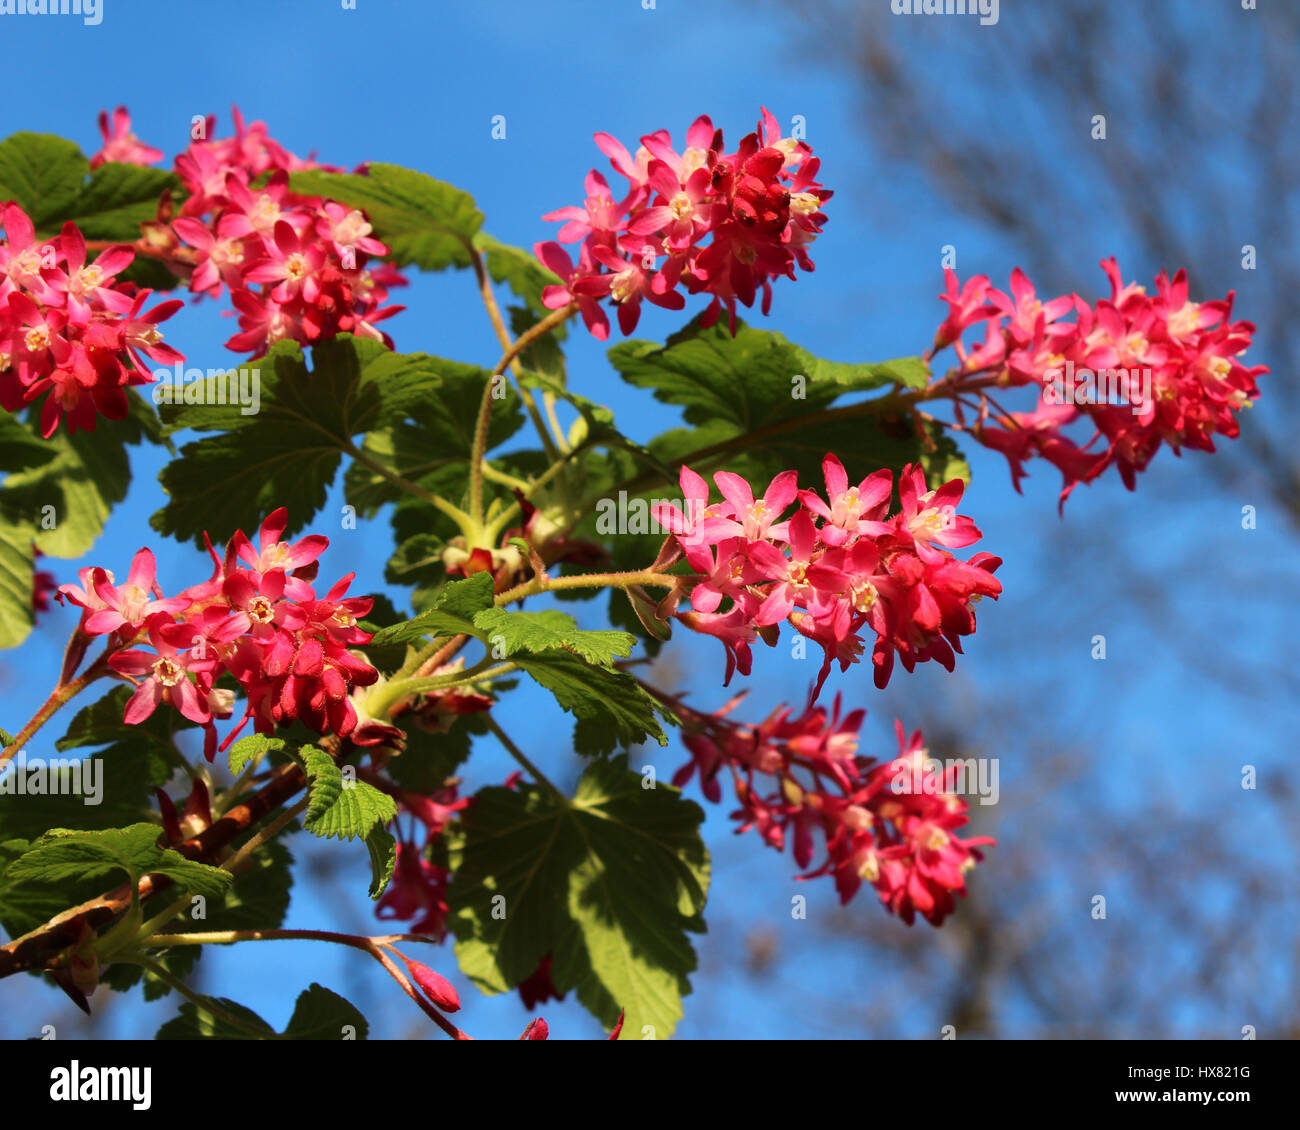 The early spring flowers of Ribes sanguineum also known as Flowering Currant or Red Flower Currant against a background of blue sky. Stock Photo